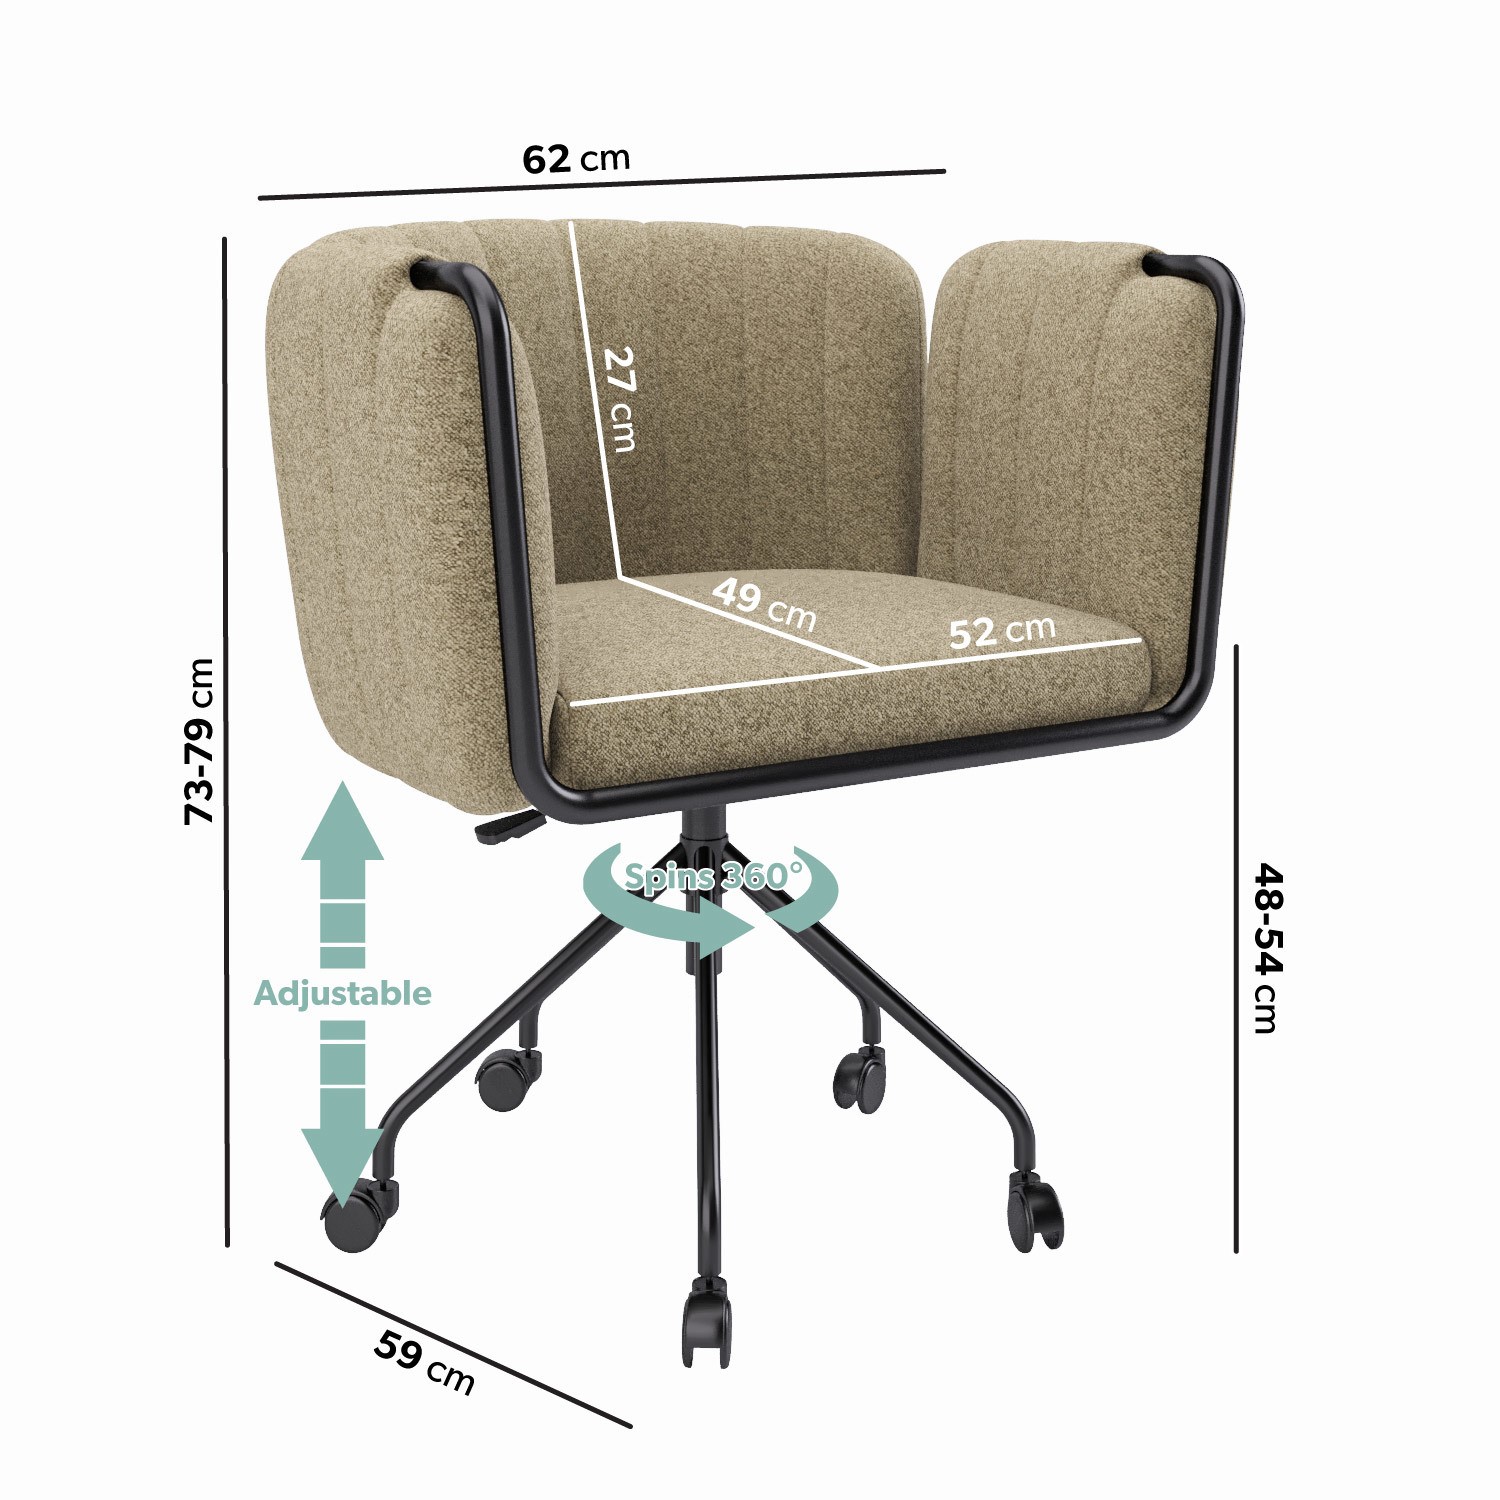 Read more about Mink fabric swivel office chair orlaa